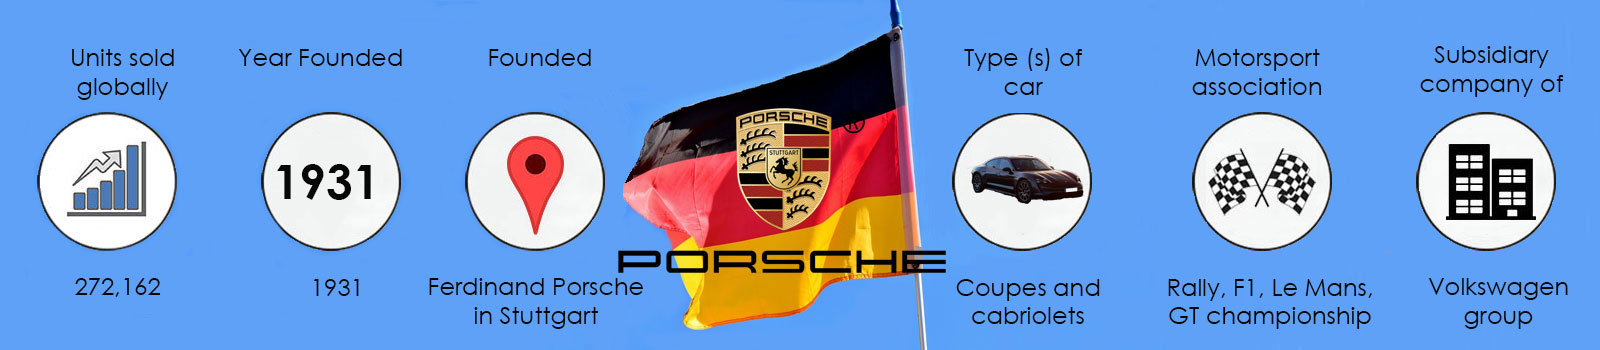 The history of Porsche infographic showing sales, founding information and car facts